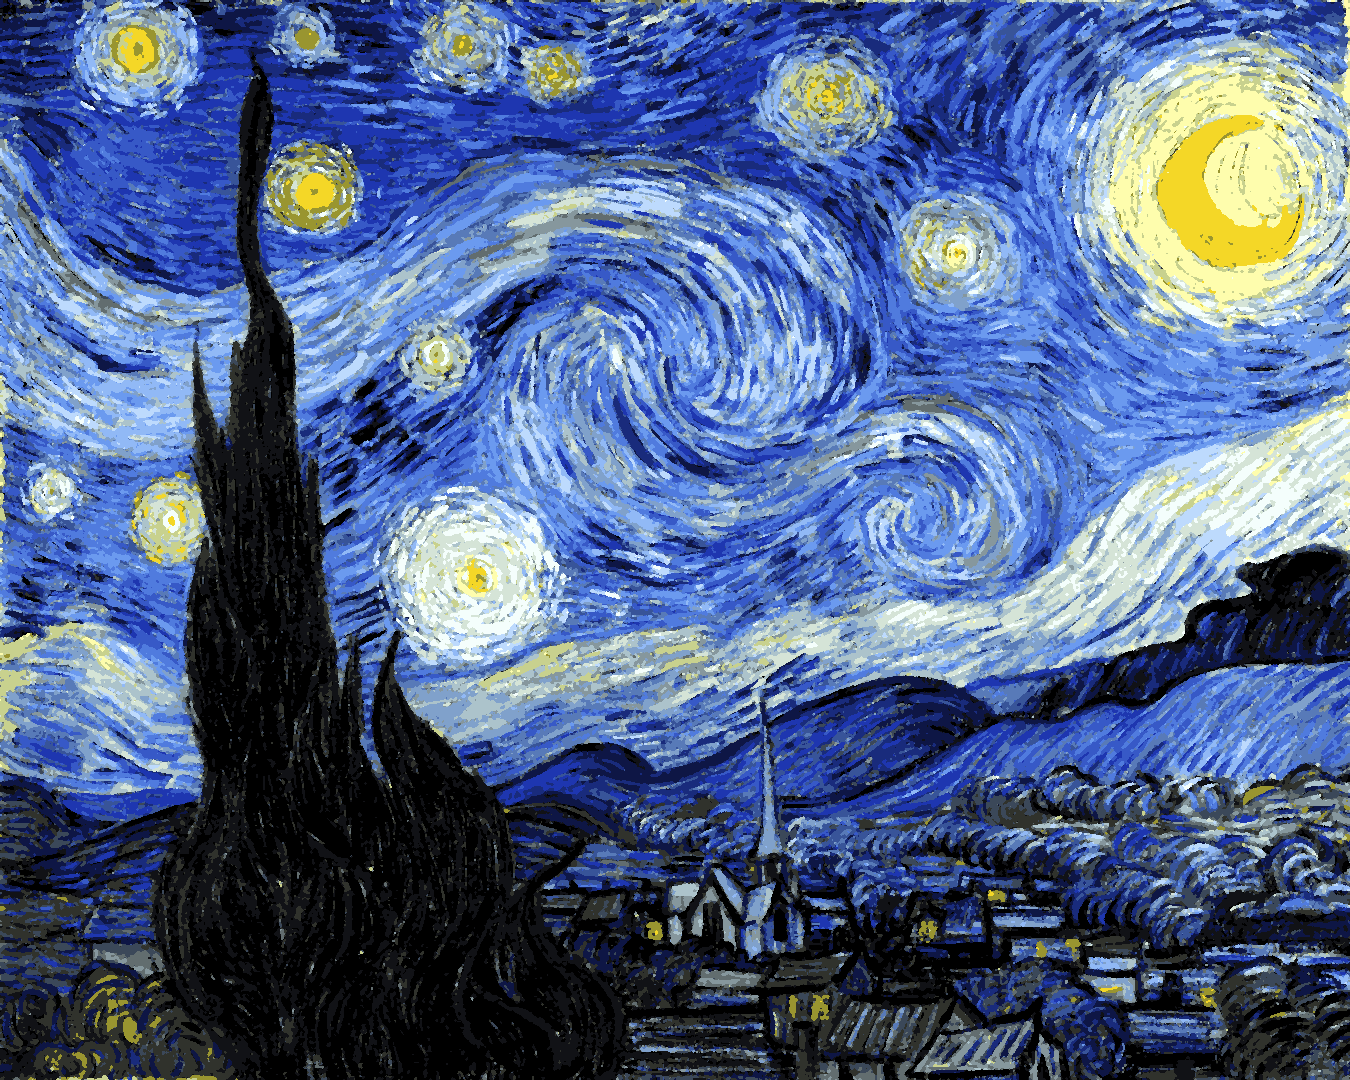 Vincent Van Gogh PD - (162) - The Starry Night - Van-Go Paint-By-Number Kit